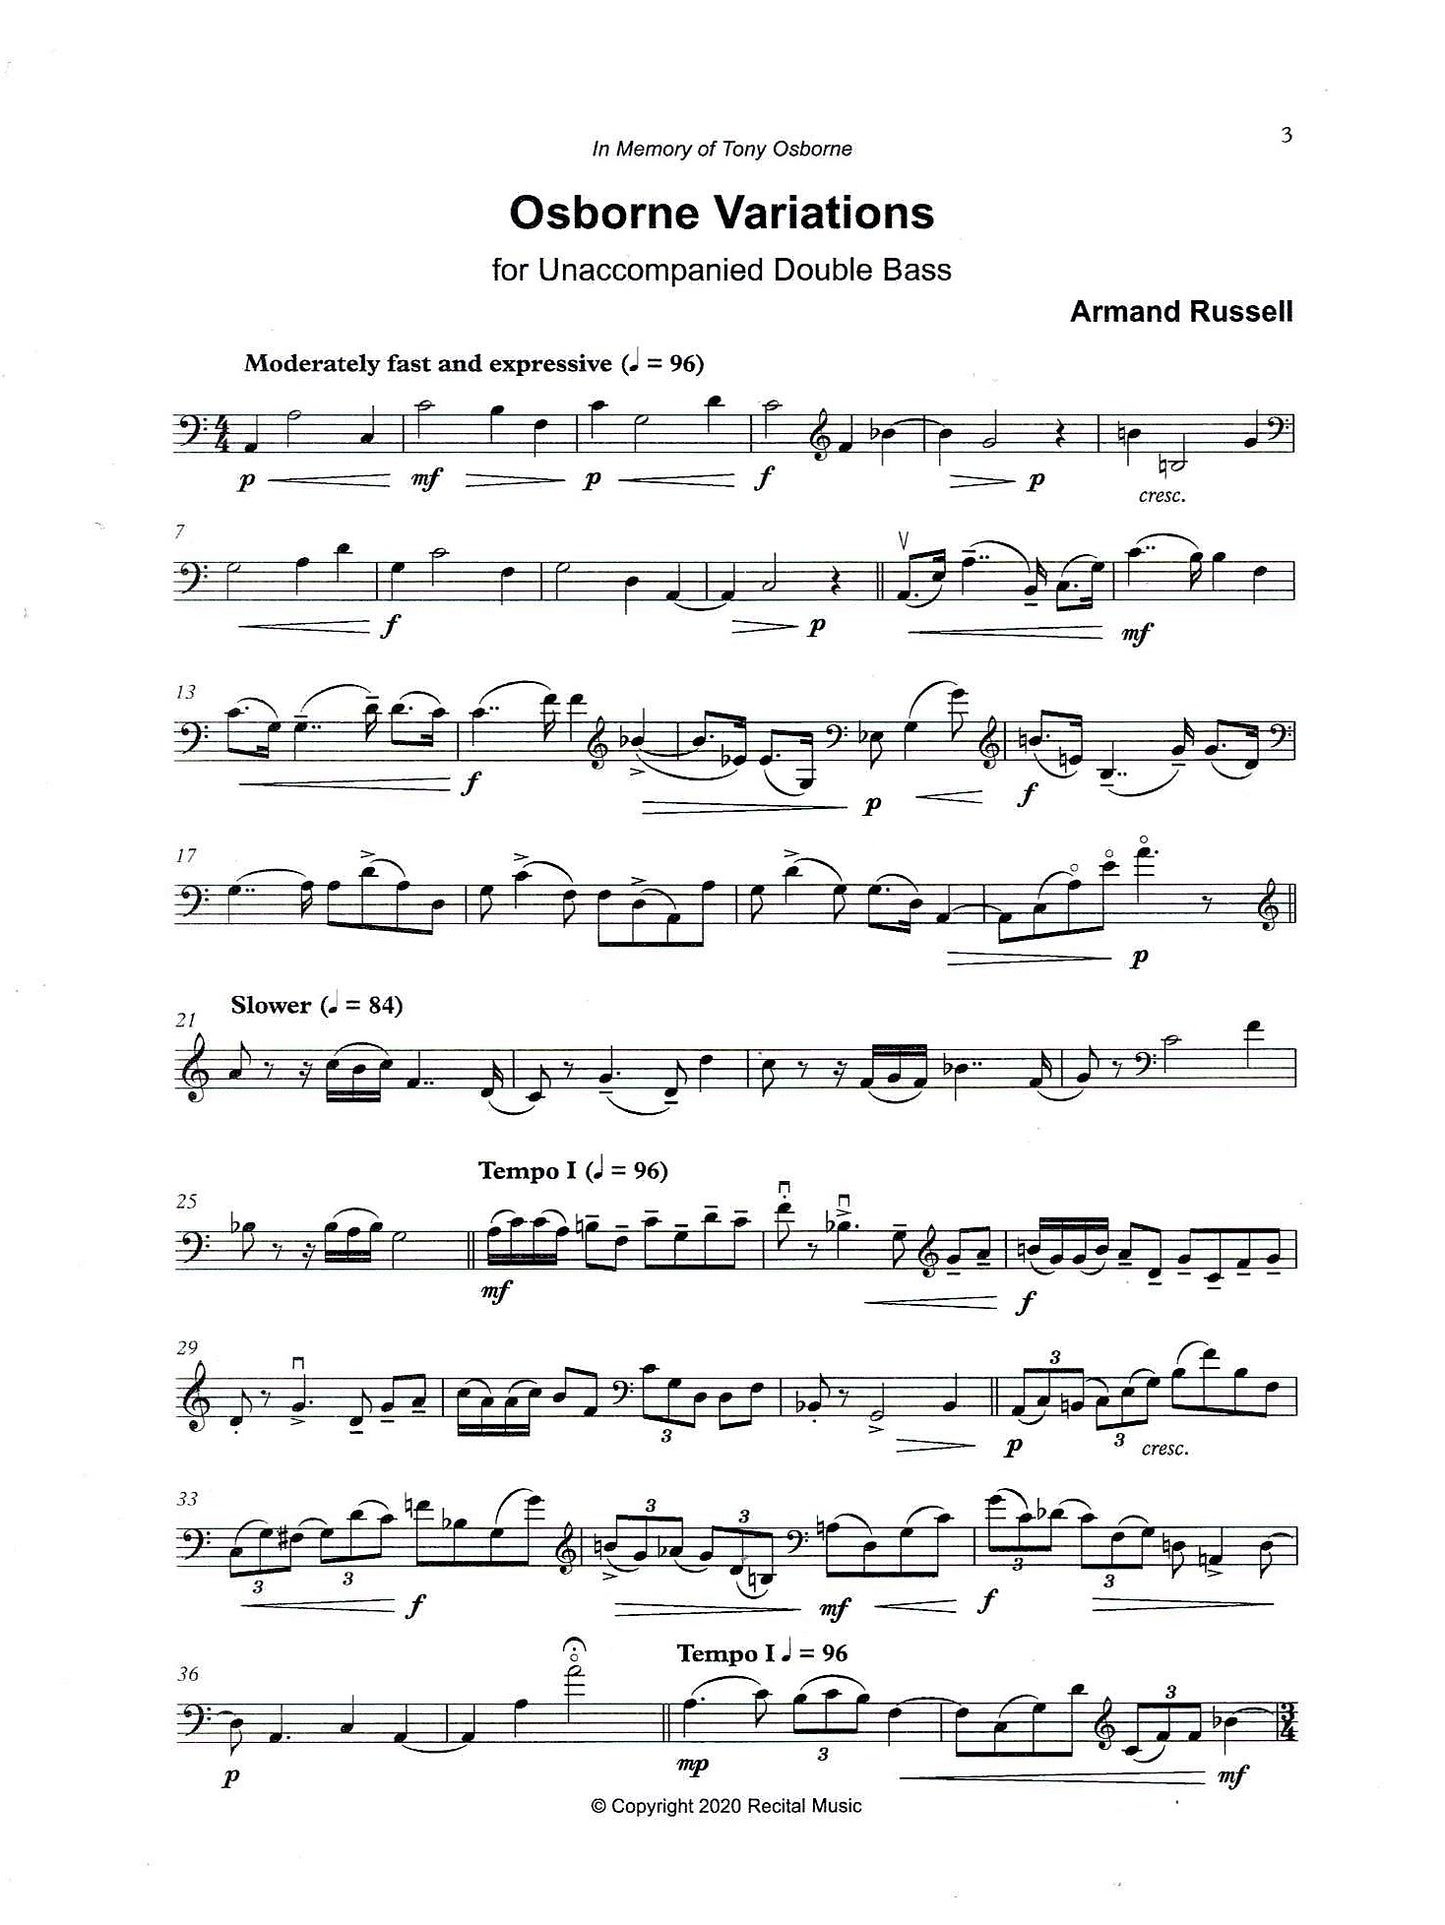 Armand Russell: Celebrations Book 10 for unaccompanied double bass